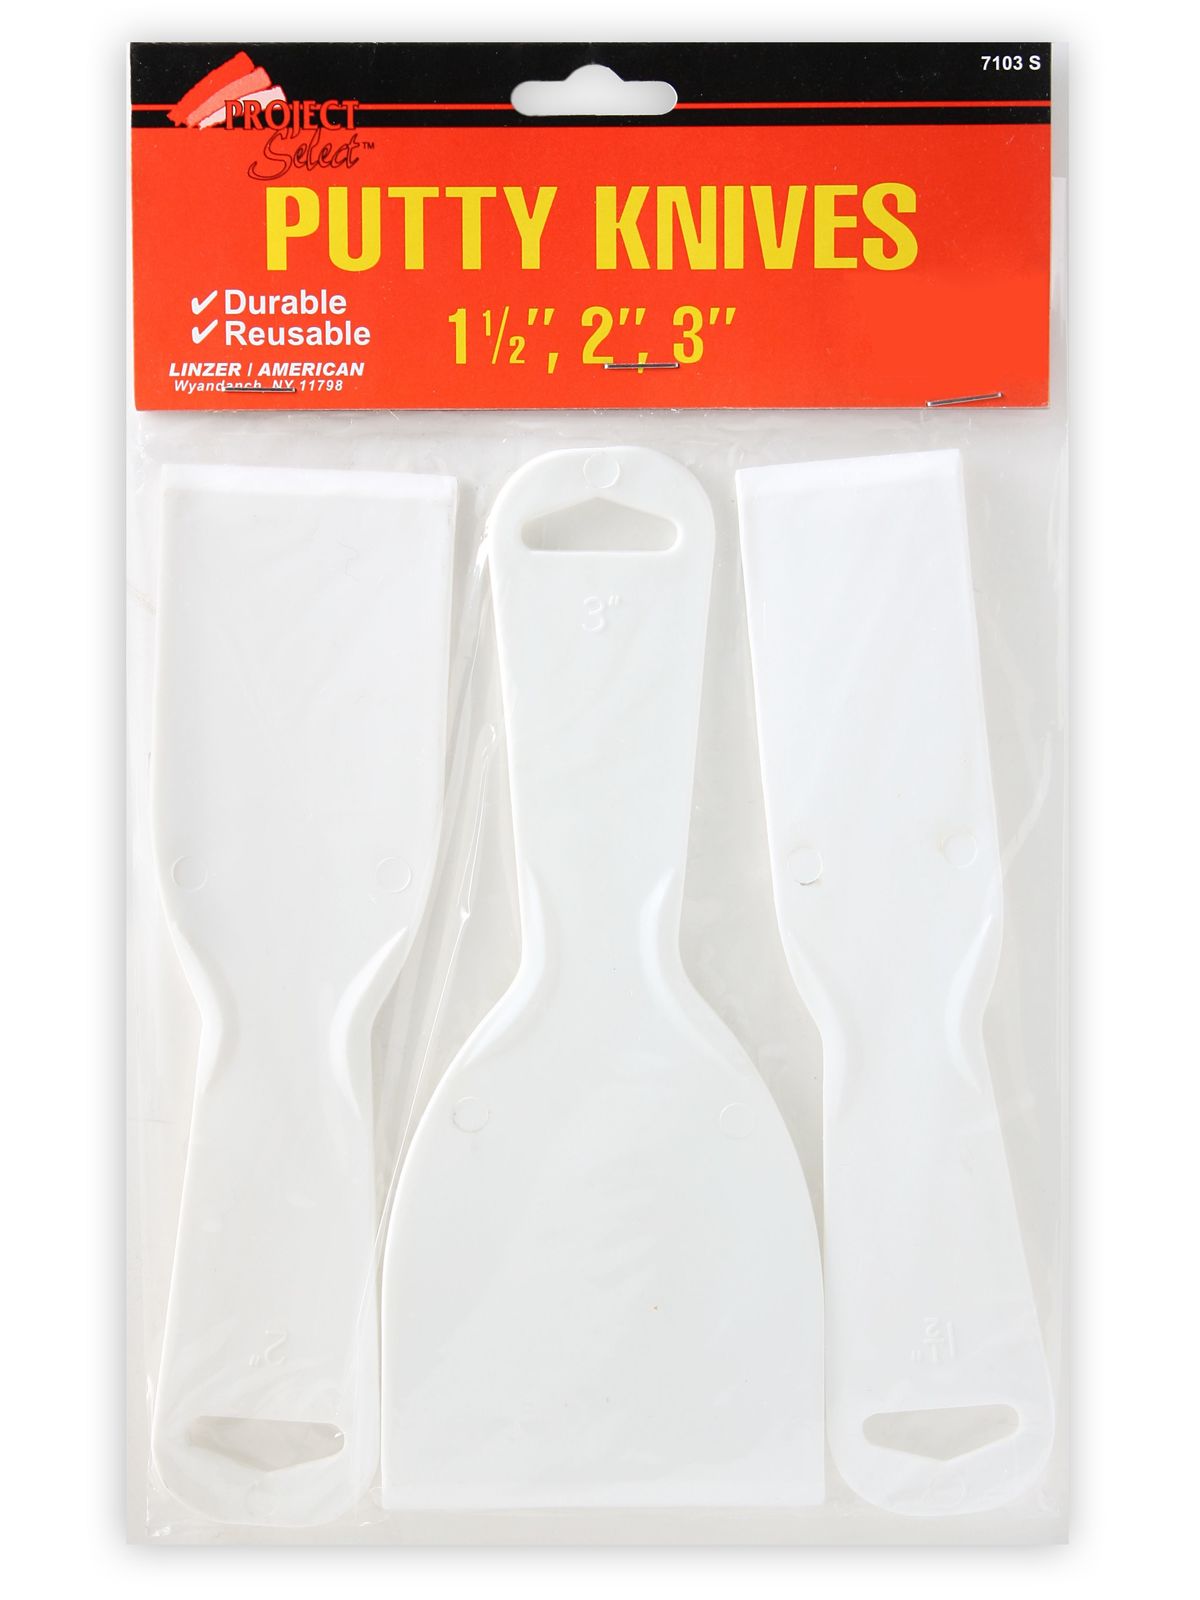 Plastic Putty Knives Putty Knives